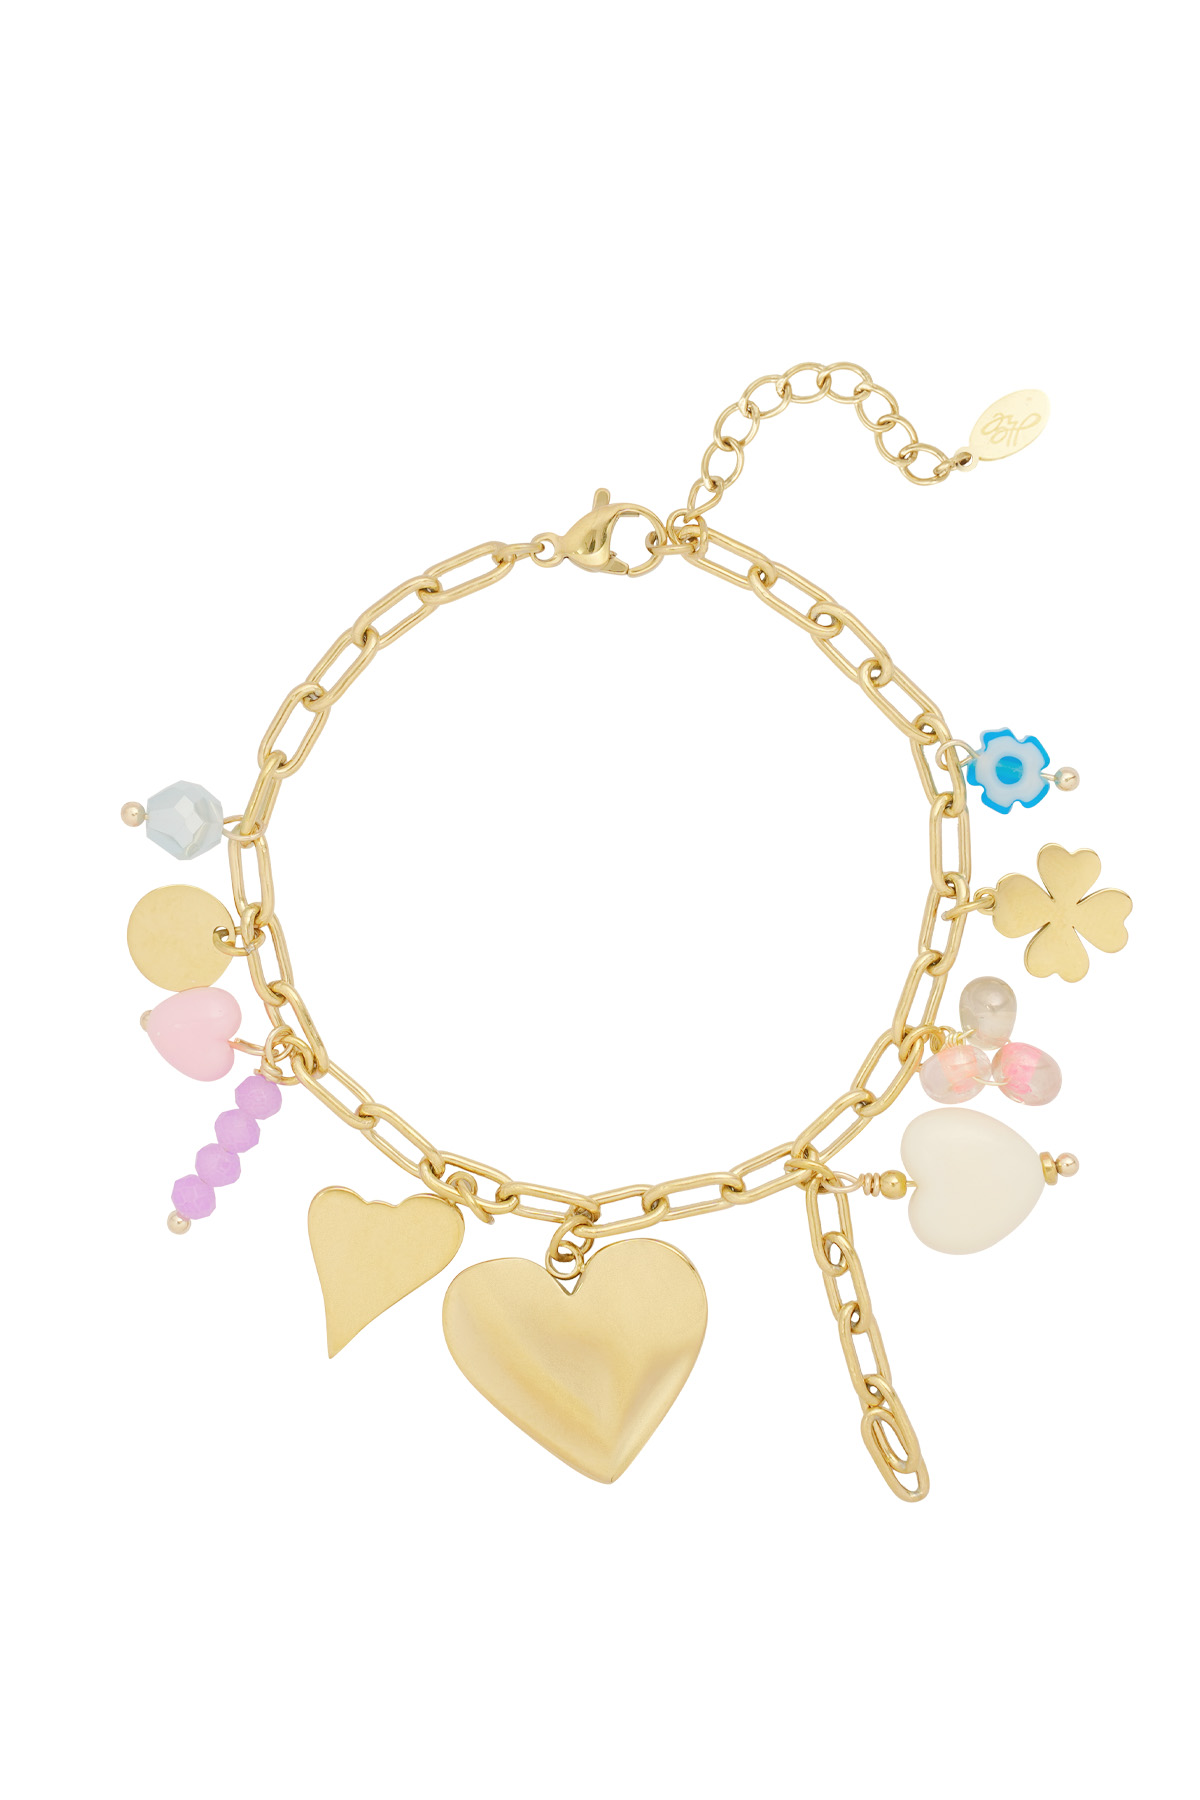 Charm bracelet colored charms - gold